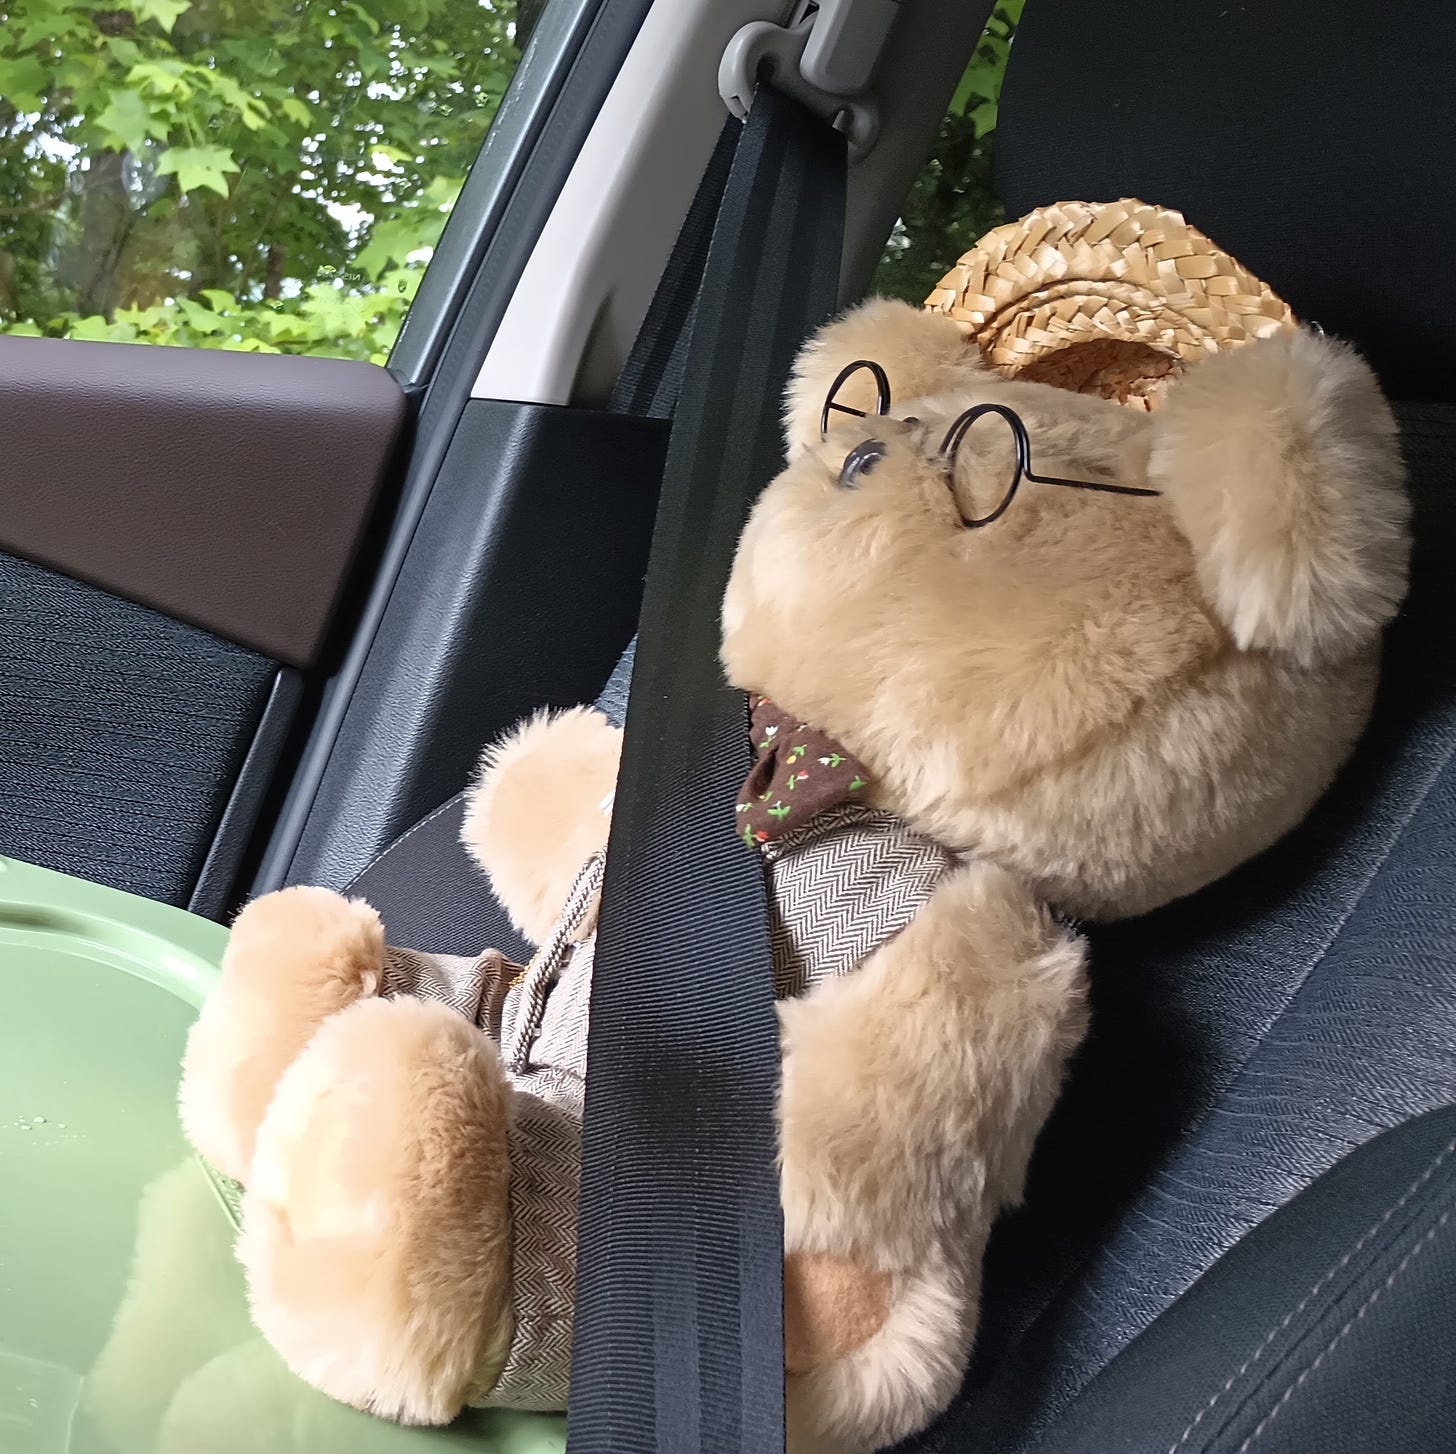 Clarence the stuffed bear in the car